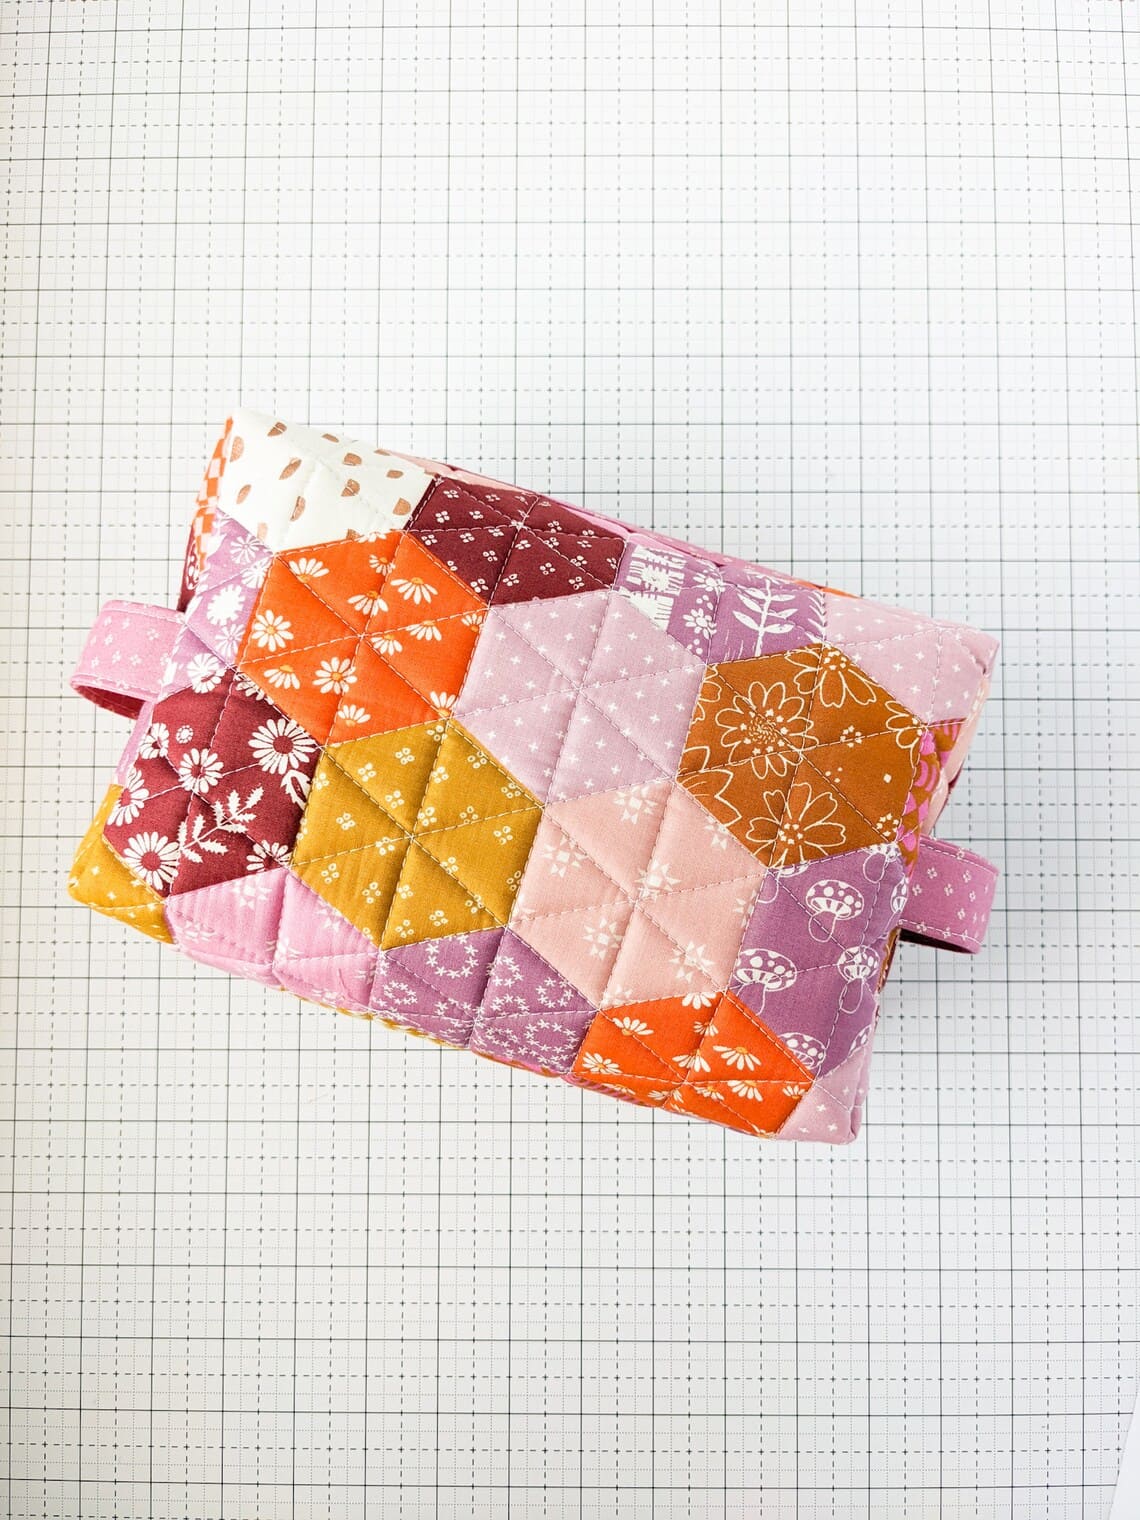 Holland Pouch - Quilt Pattern